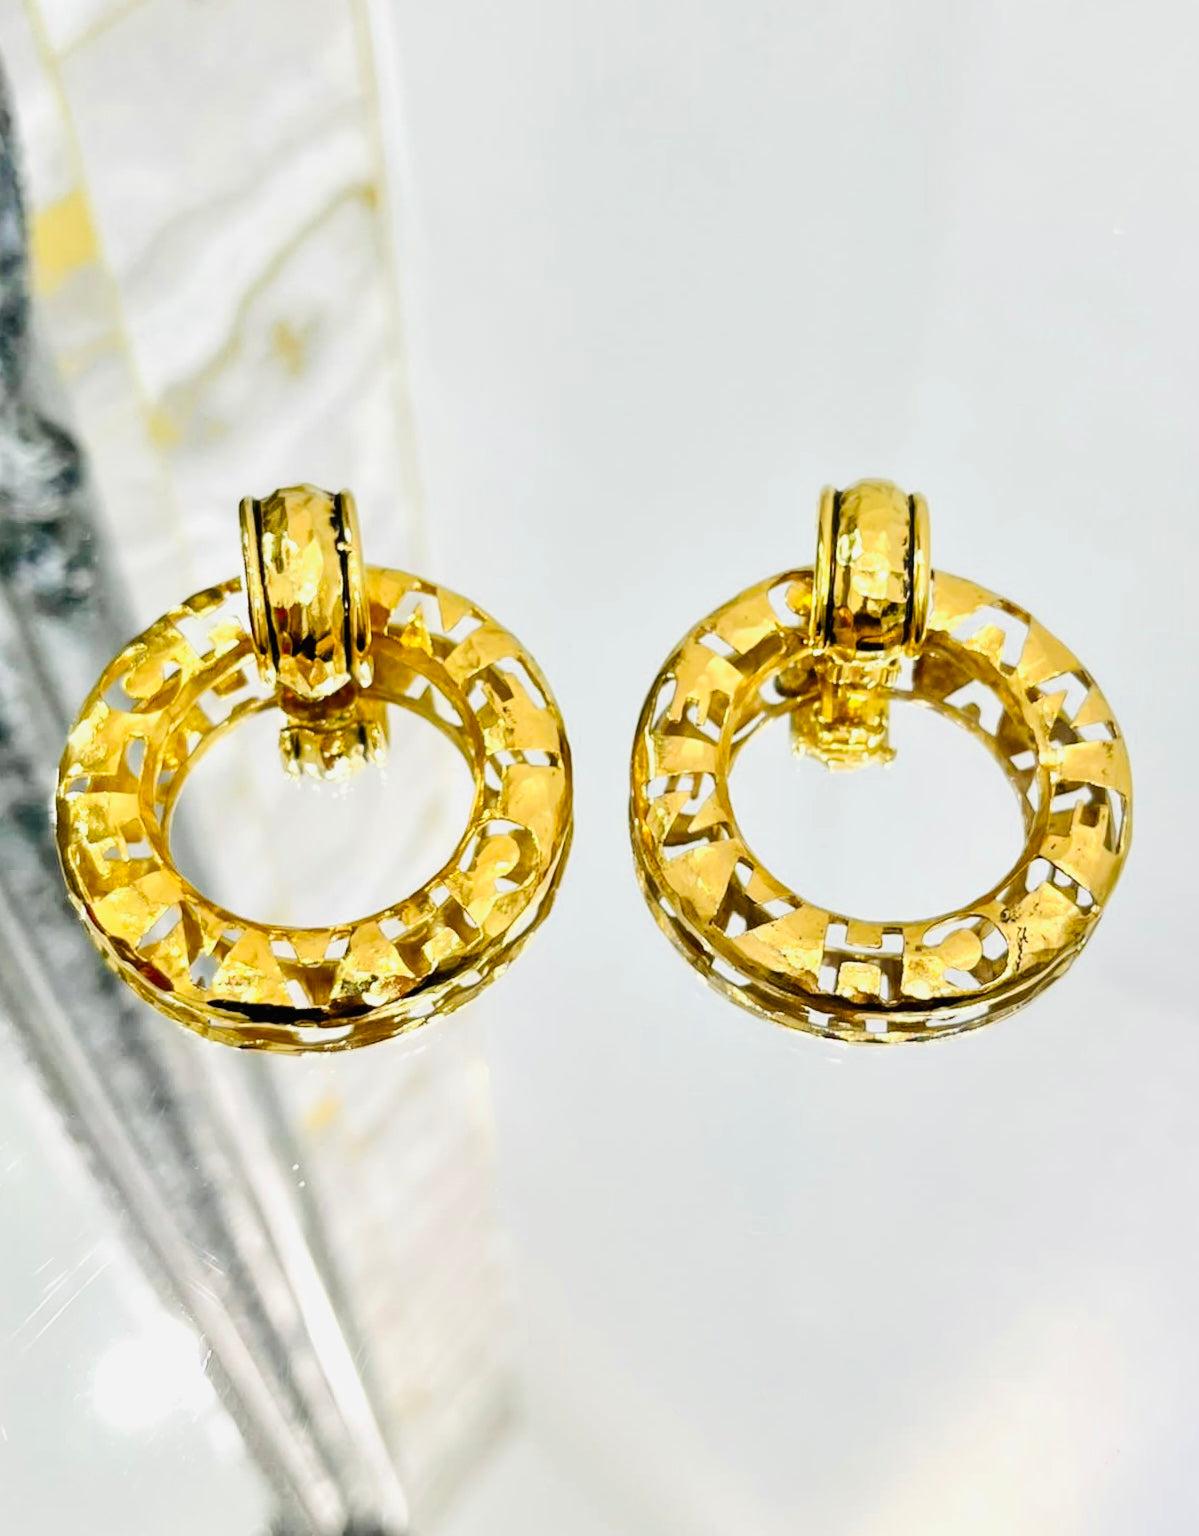  Chanel 24k Gold Plated Logo Vintage 1980's Earrings

Collectors earring, large gold, cut out hoops with the wording 

'chanel' sat on detachable clips.

For non pierced ears.

Size - One Size

Condition - Vintage - Very Good

Composition - 24k Gold